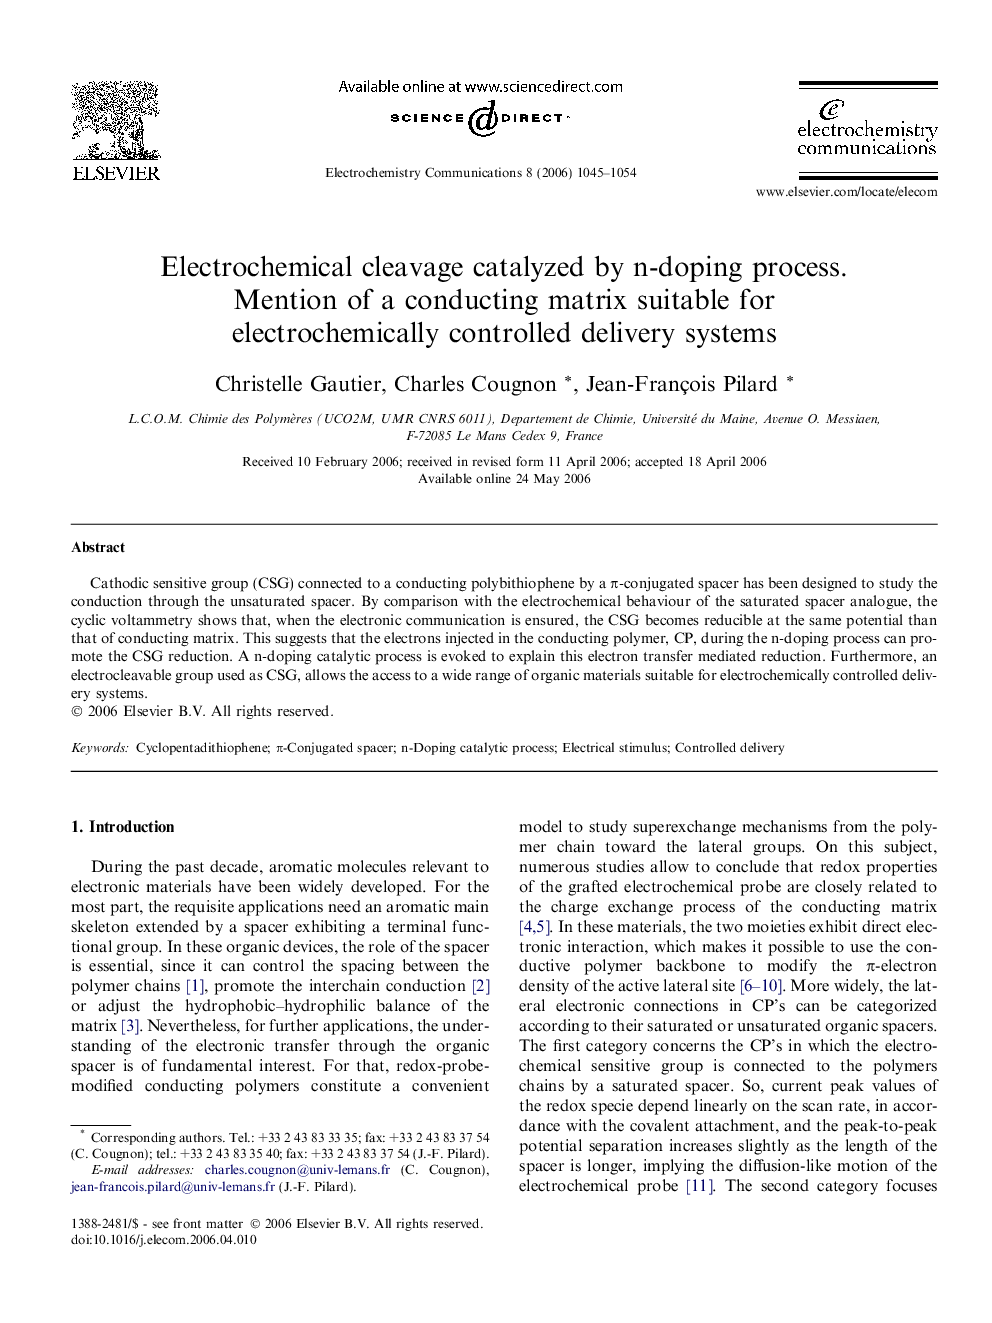 Electrochemical cleavage catalyzed by n-doping process. Mention of a conducting matrix suitable for electrochemically controlled delivery systems